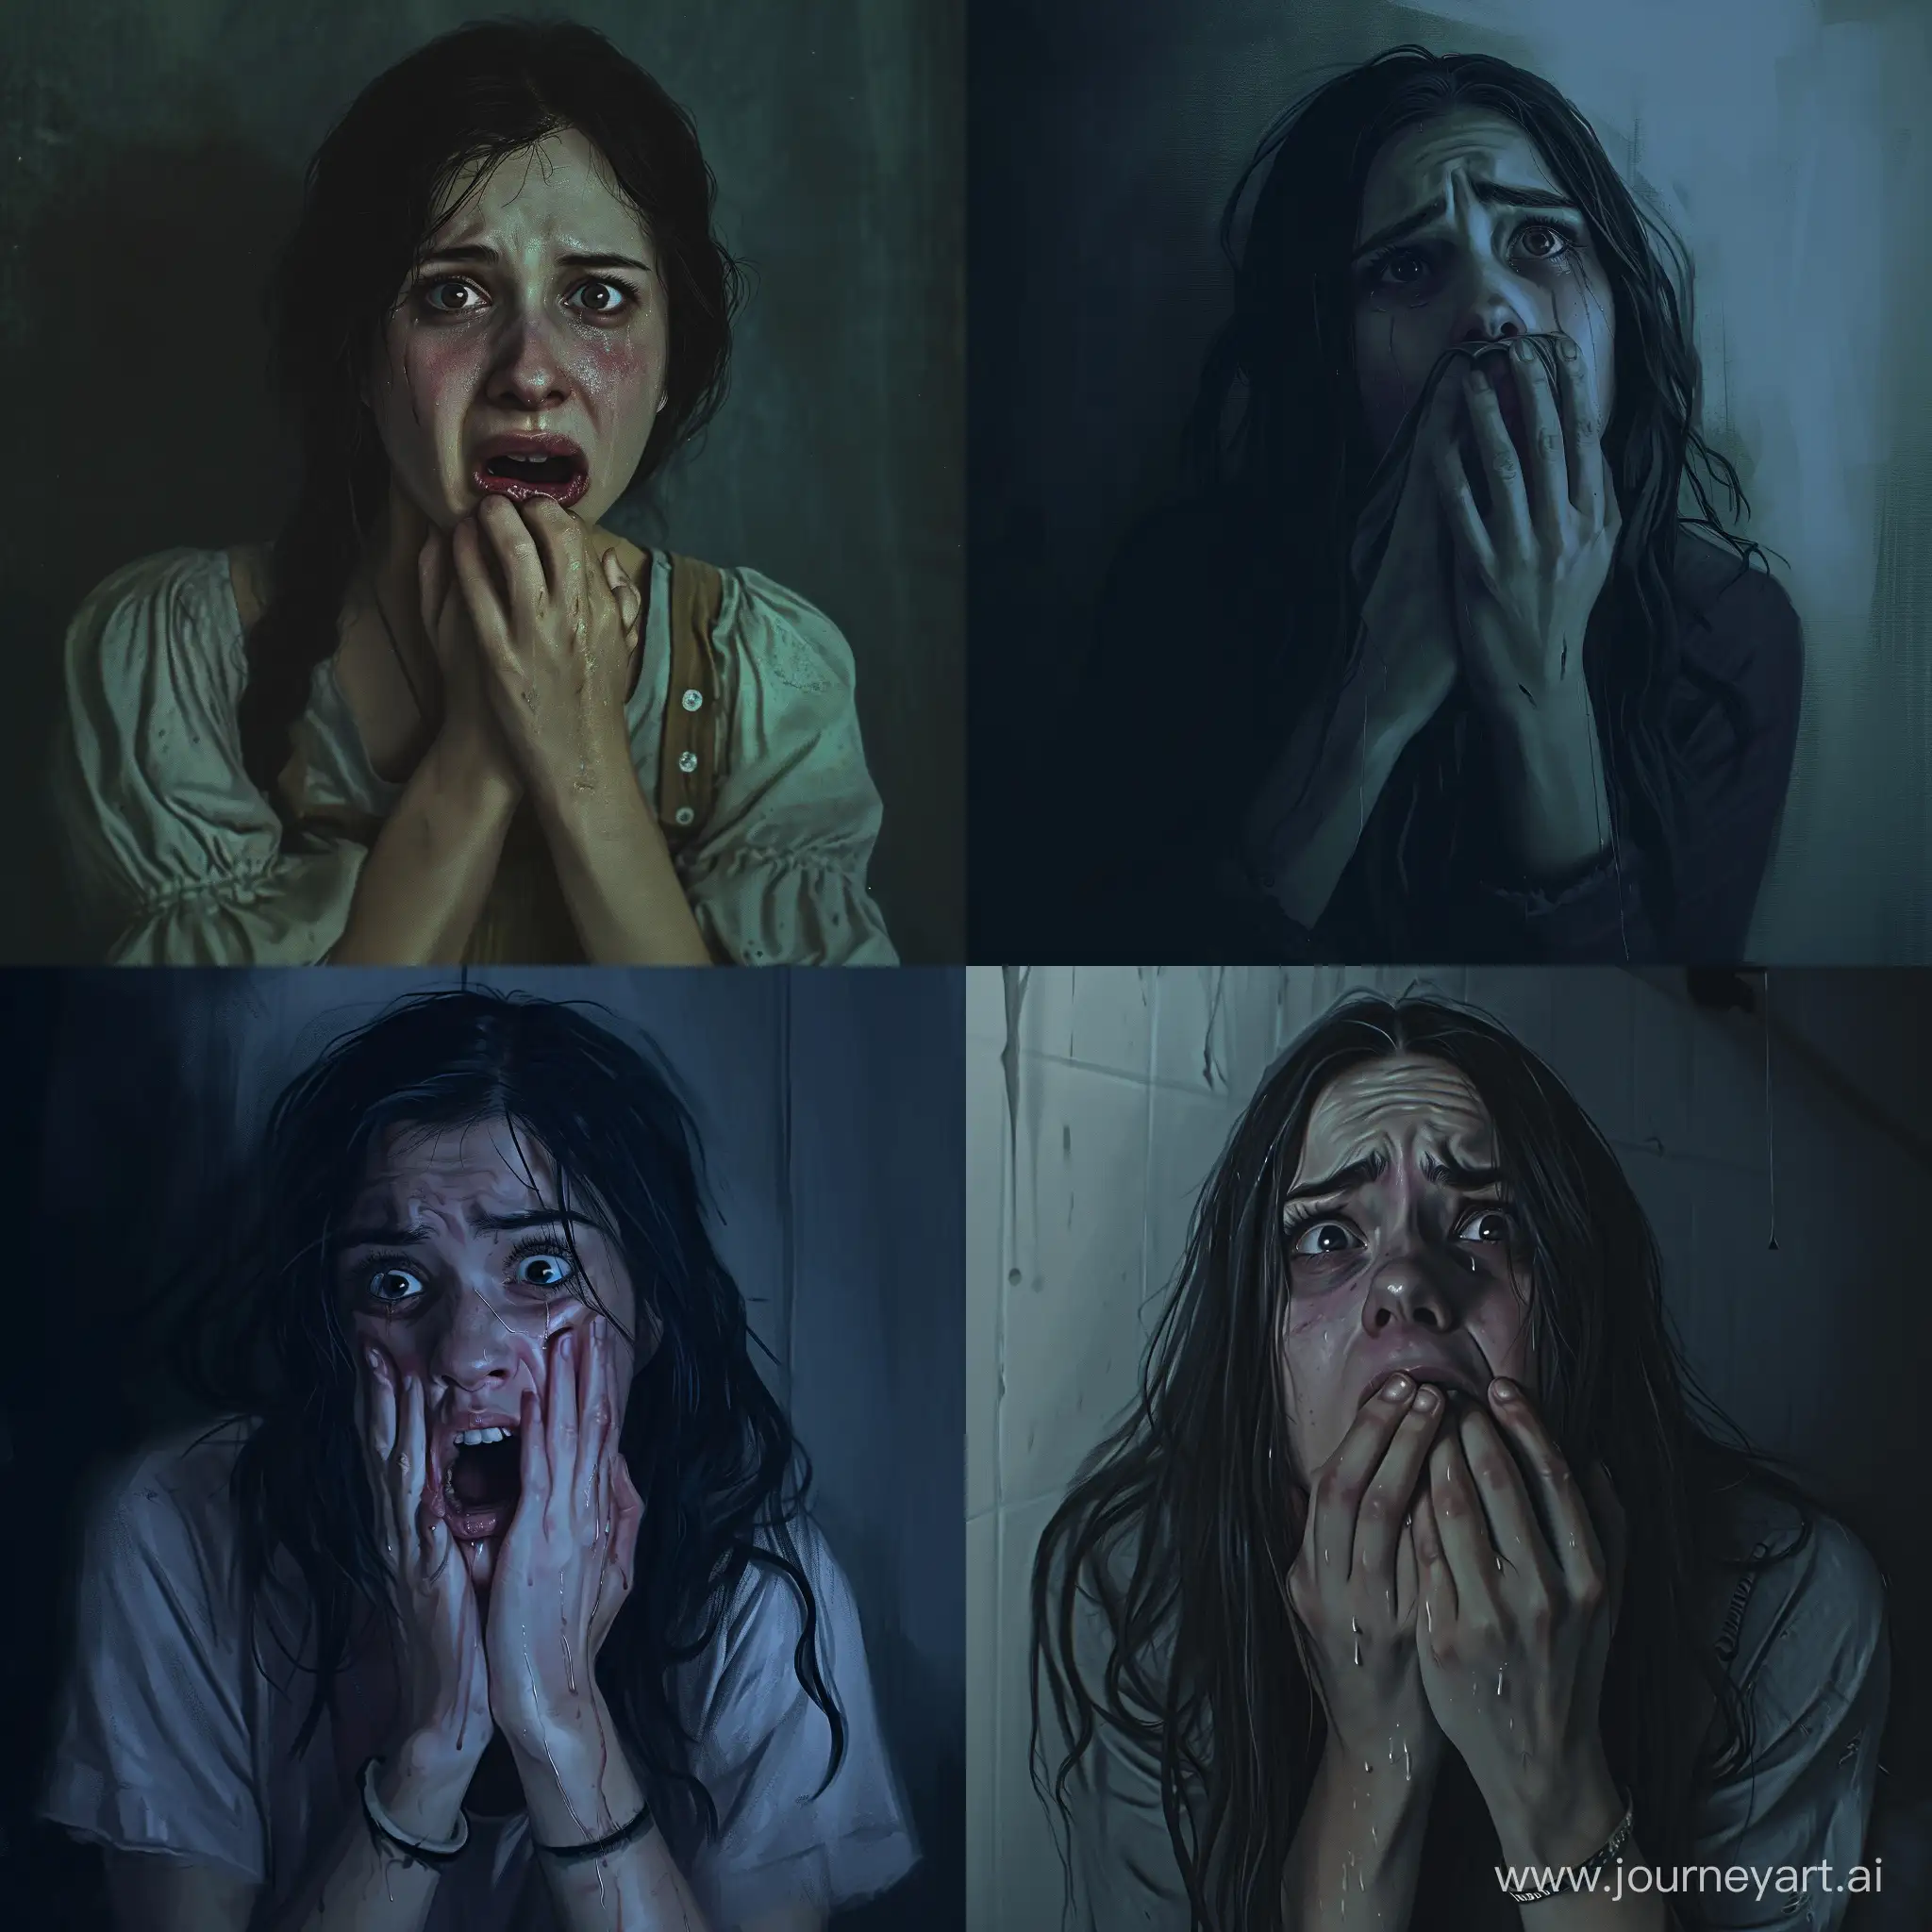 Terrified crying woman portrait, hiding from danger, holding her mouth trying to keep quiet, fear on her face, digital art, 2d, horror movie vibes, dark anime style, muted colors, realistic, masterpiece